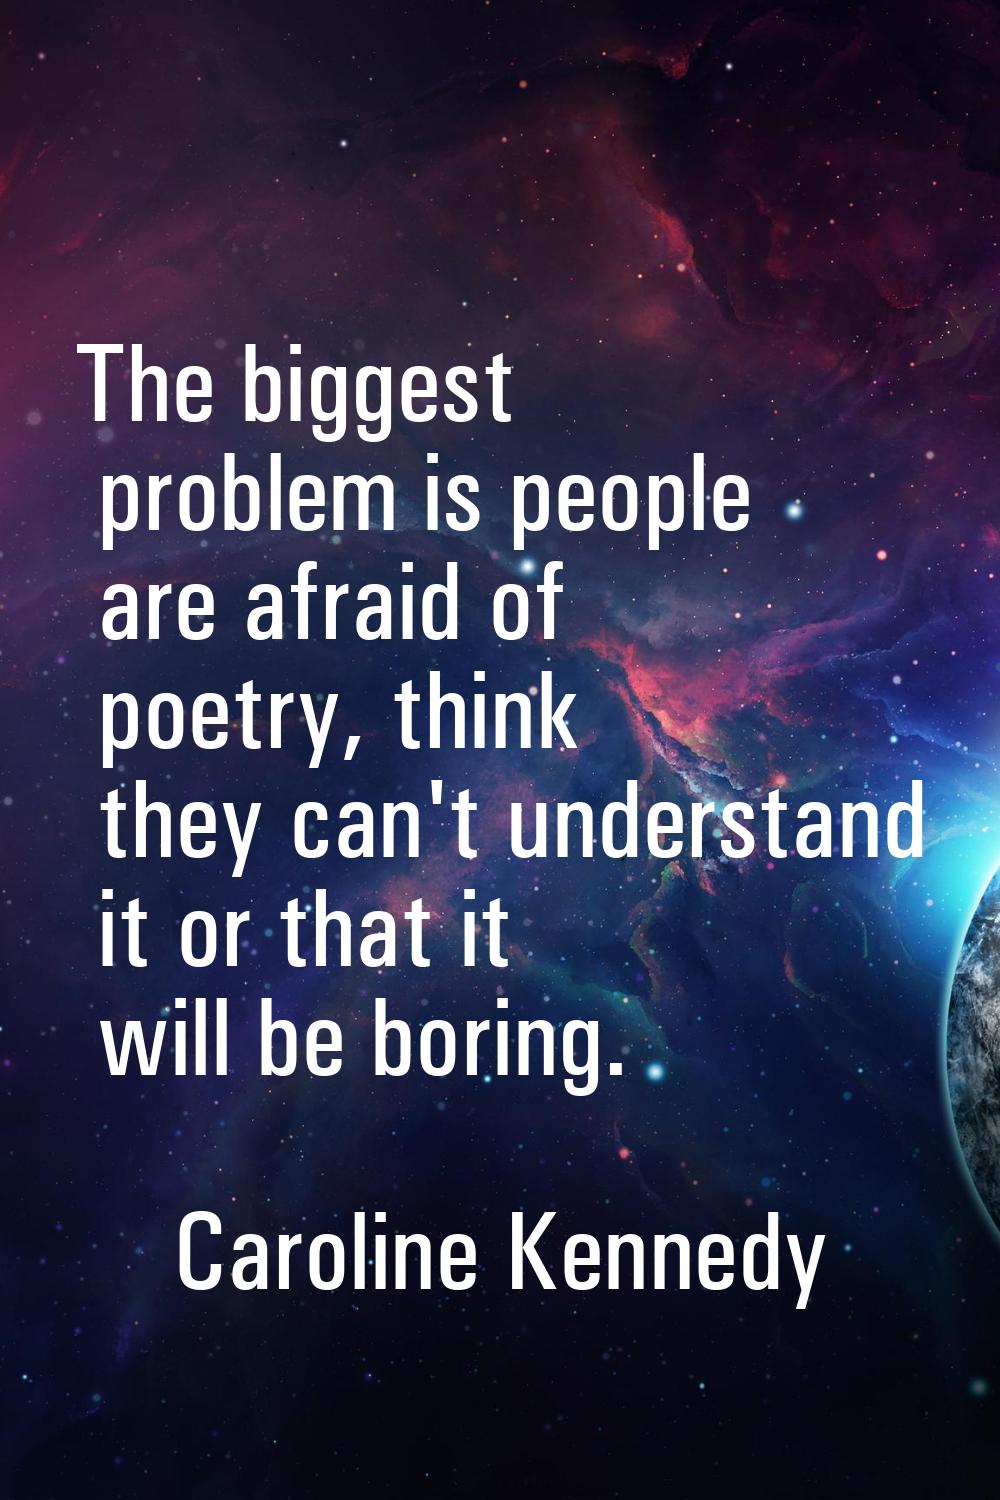 The biggest problem is people are afraid of poetry, think they can't understand it or that it will 